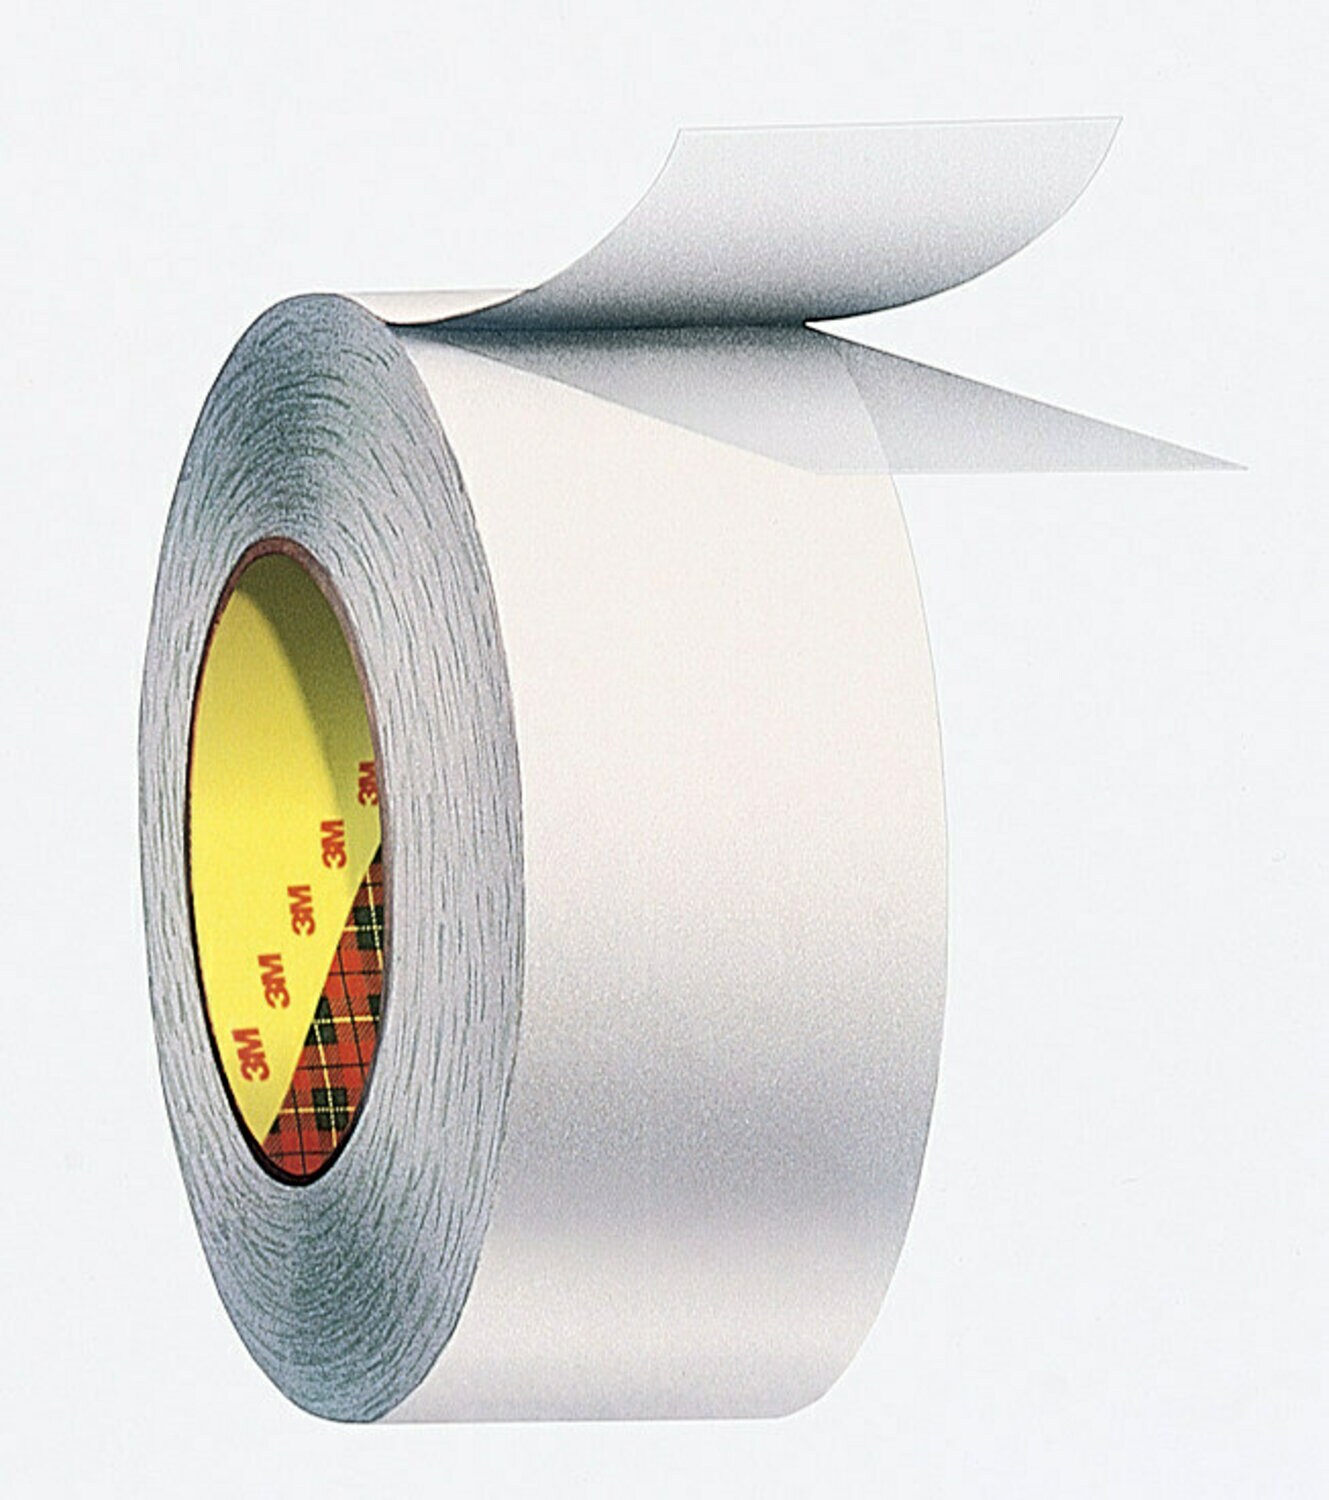 7100012224 - 3M Repositionable Tape 9449S, Clear, 0.4 mil, Roll, Config